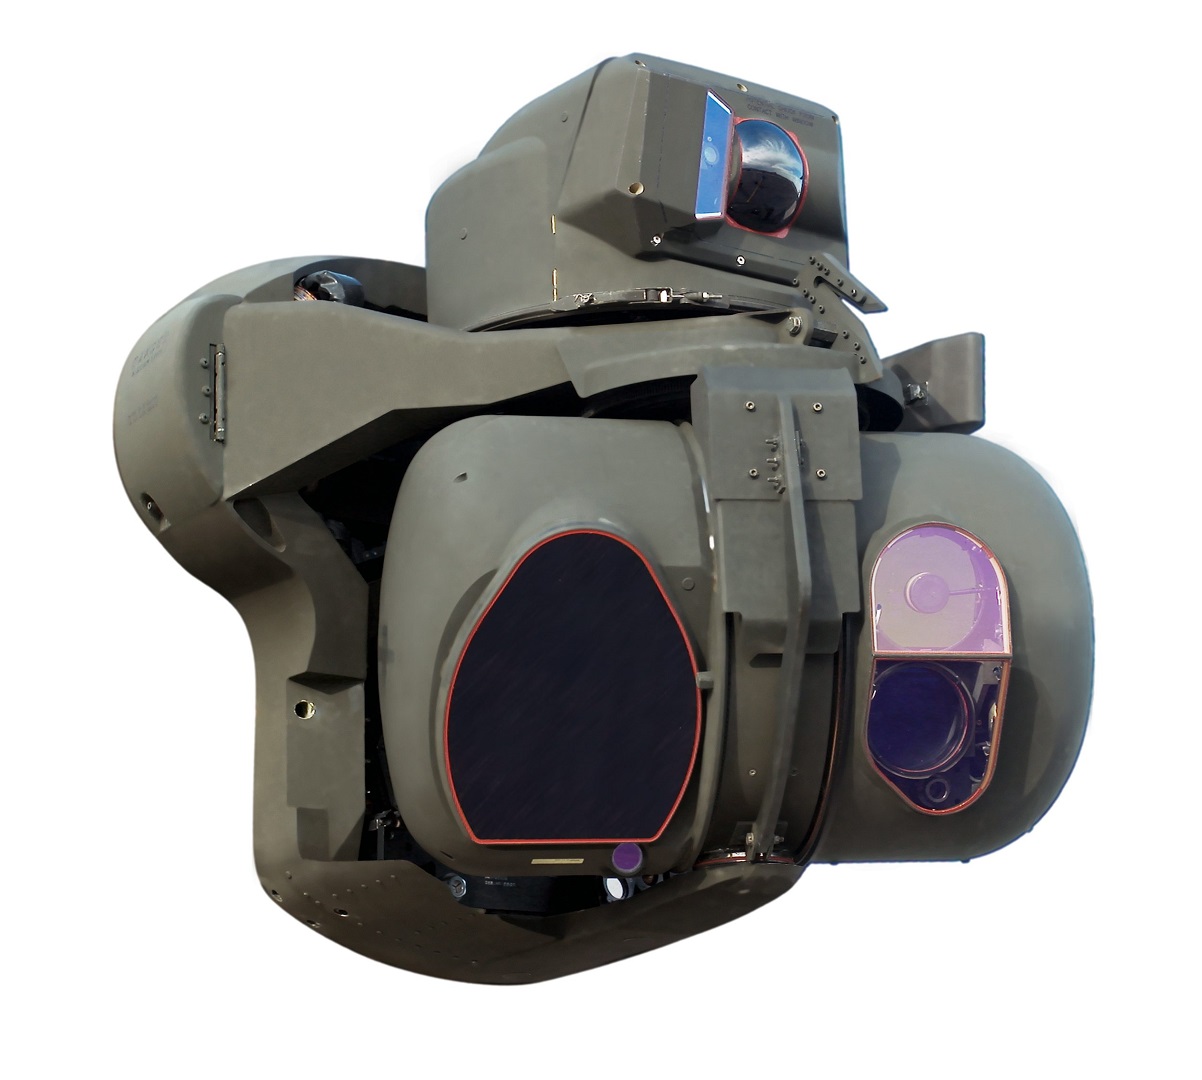 With these Modernized Target Acquisition Designation/Pilot Night Vision Sensor System (M-TADS/PNVS) features - the advanced FLIR targeting and navigation sensors, new TEDAC flat-panel display, and multi-target tracker - Apache pilots who used to fight to see, can now see to fight. (Photo by Lockheed Martin)